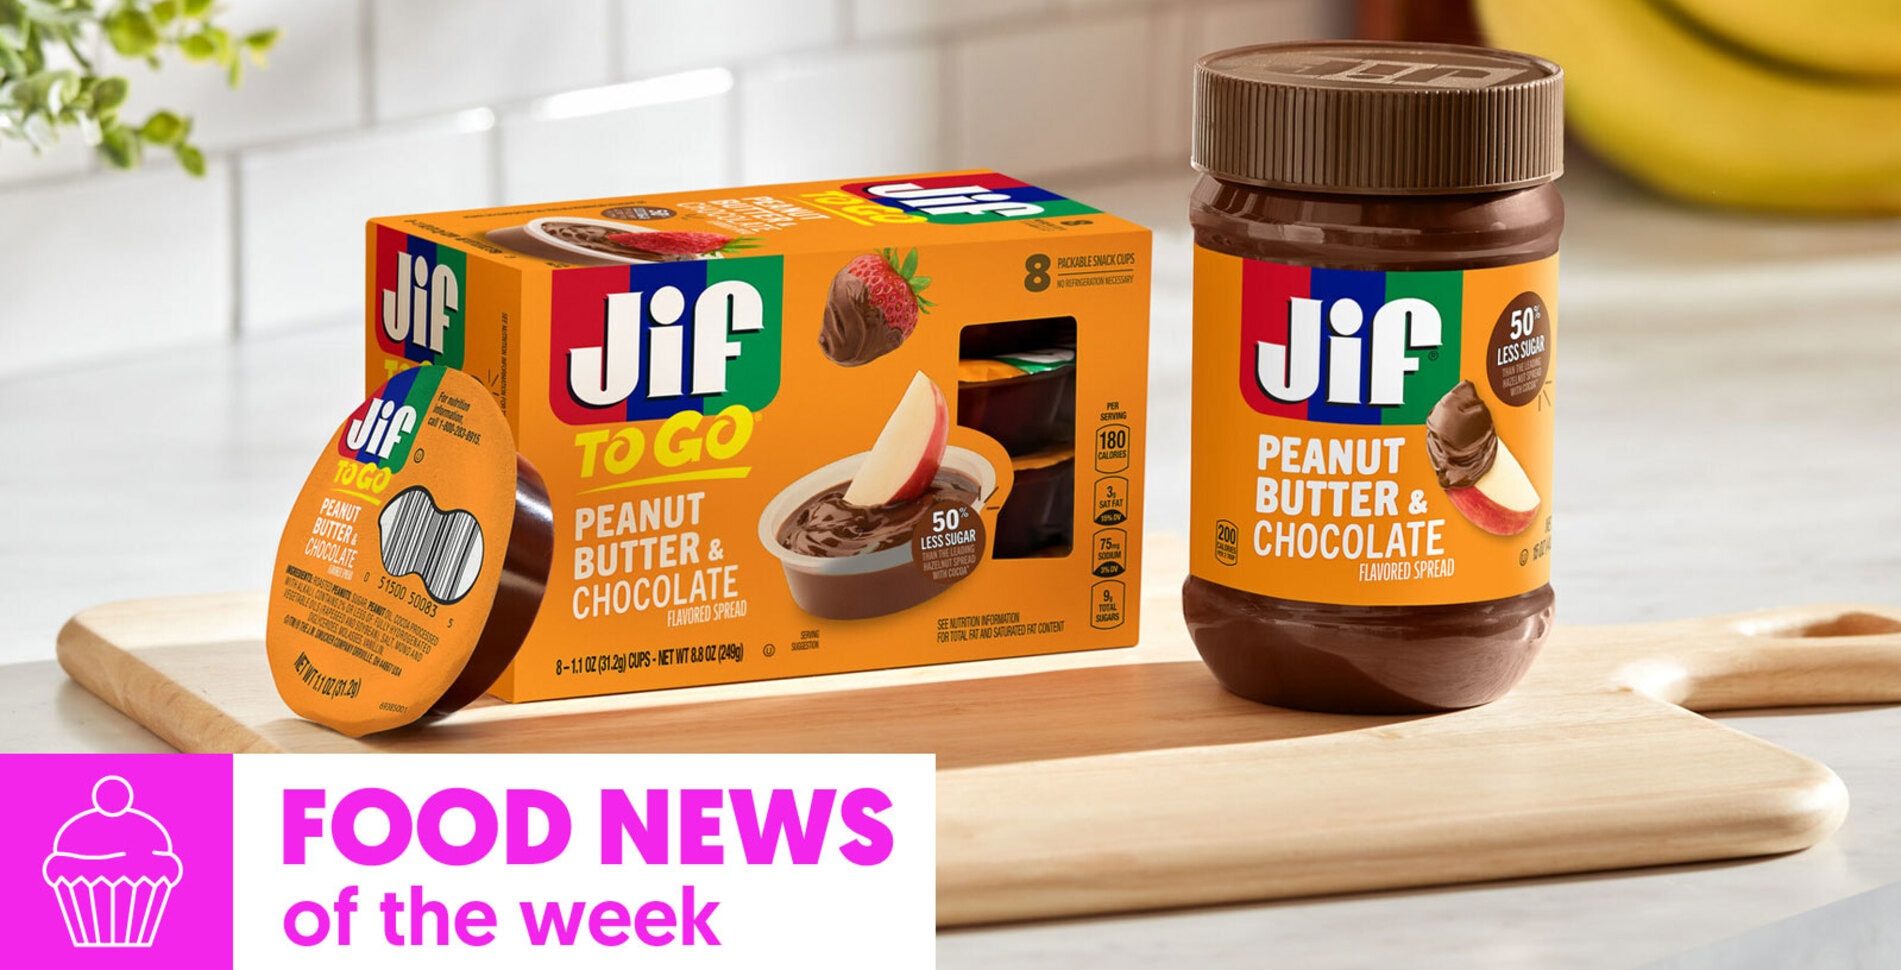 Food News of the Week: Jif Takes on Nutella, Plus Fudge Cake and Cinnamon Buns for Mom